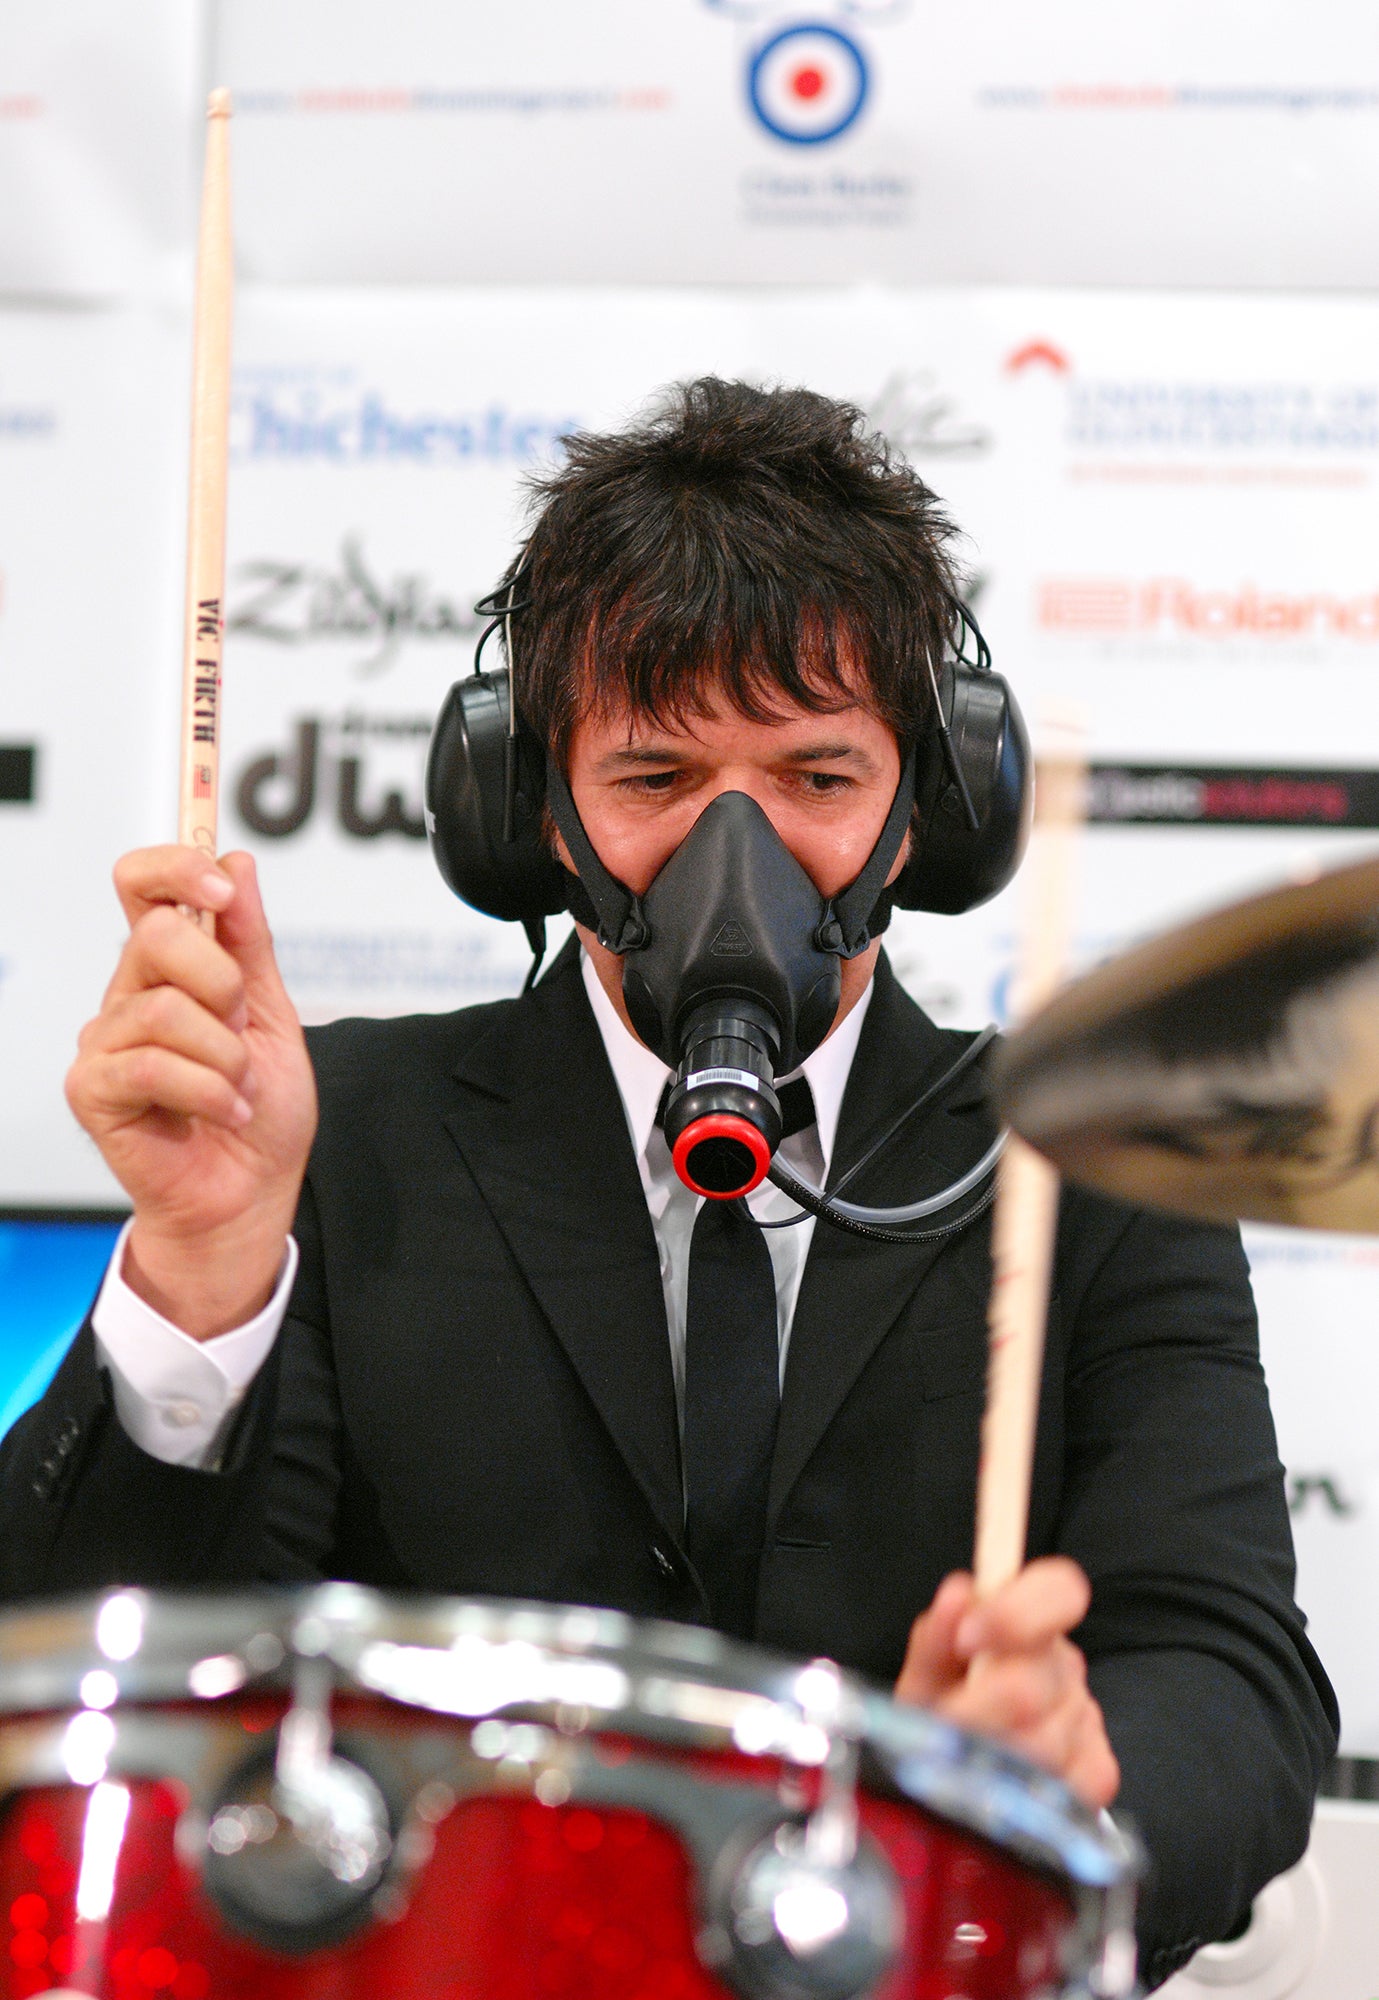 Blondie drummer Clem Burke is one of the founding members of the scientific group behind the study (University of Chichester/PA)